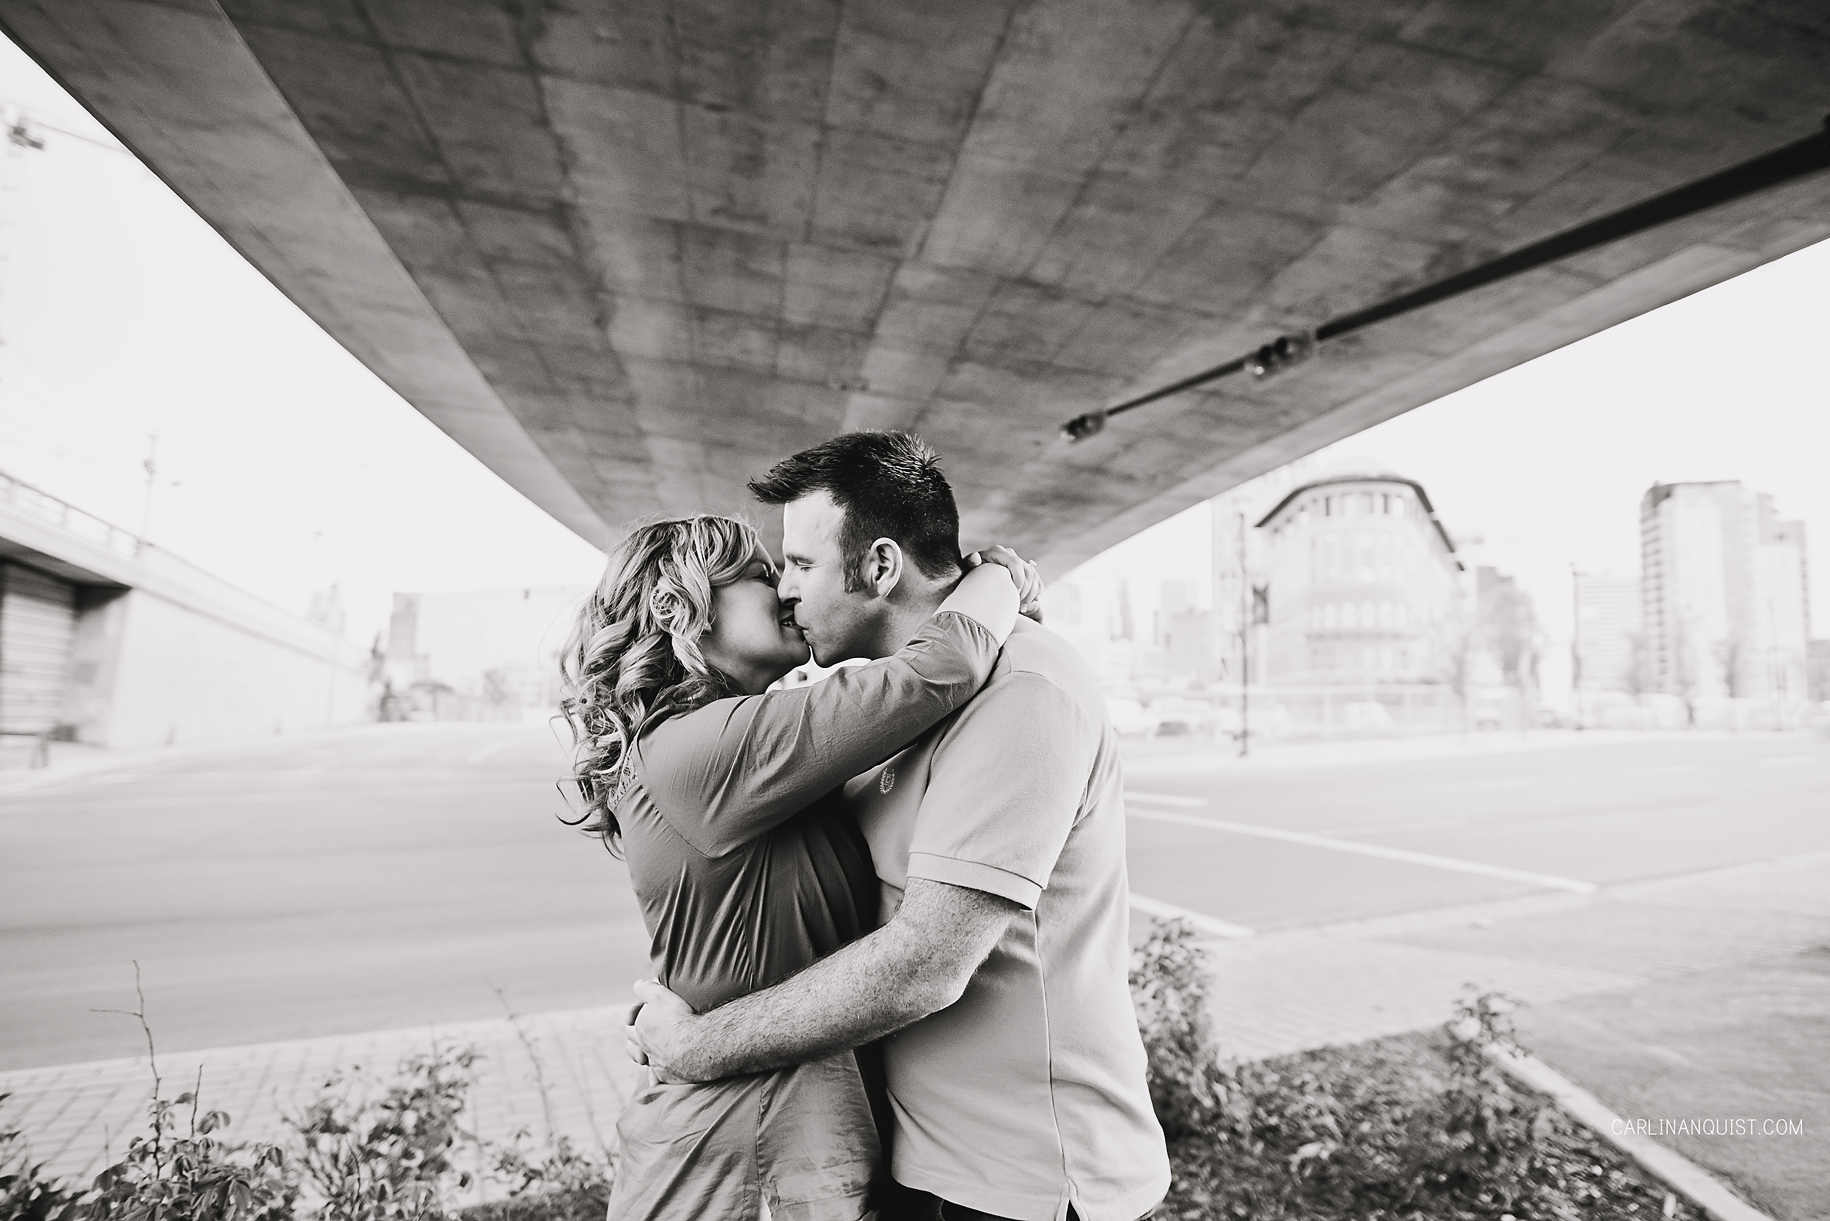  East Village Engagement Photographers | Carlin Anquist Photography